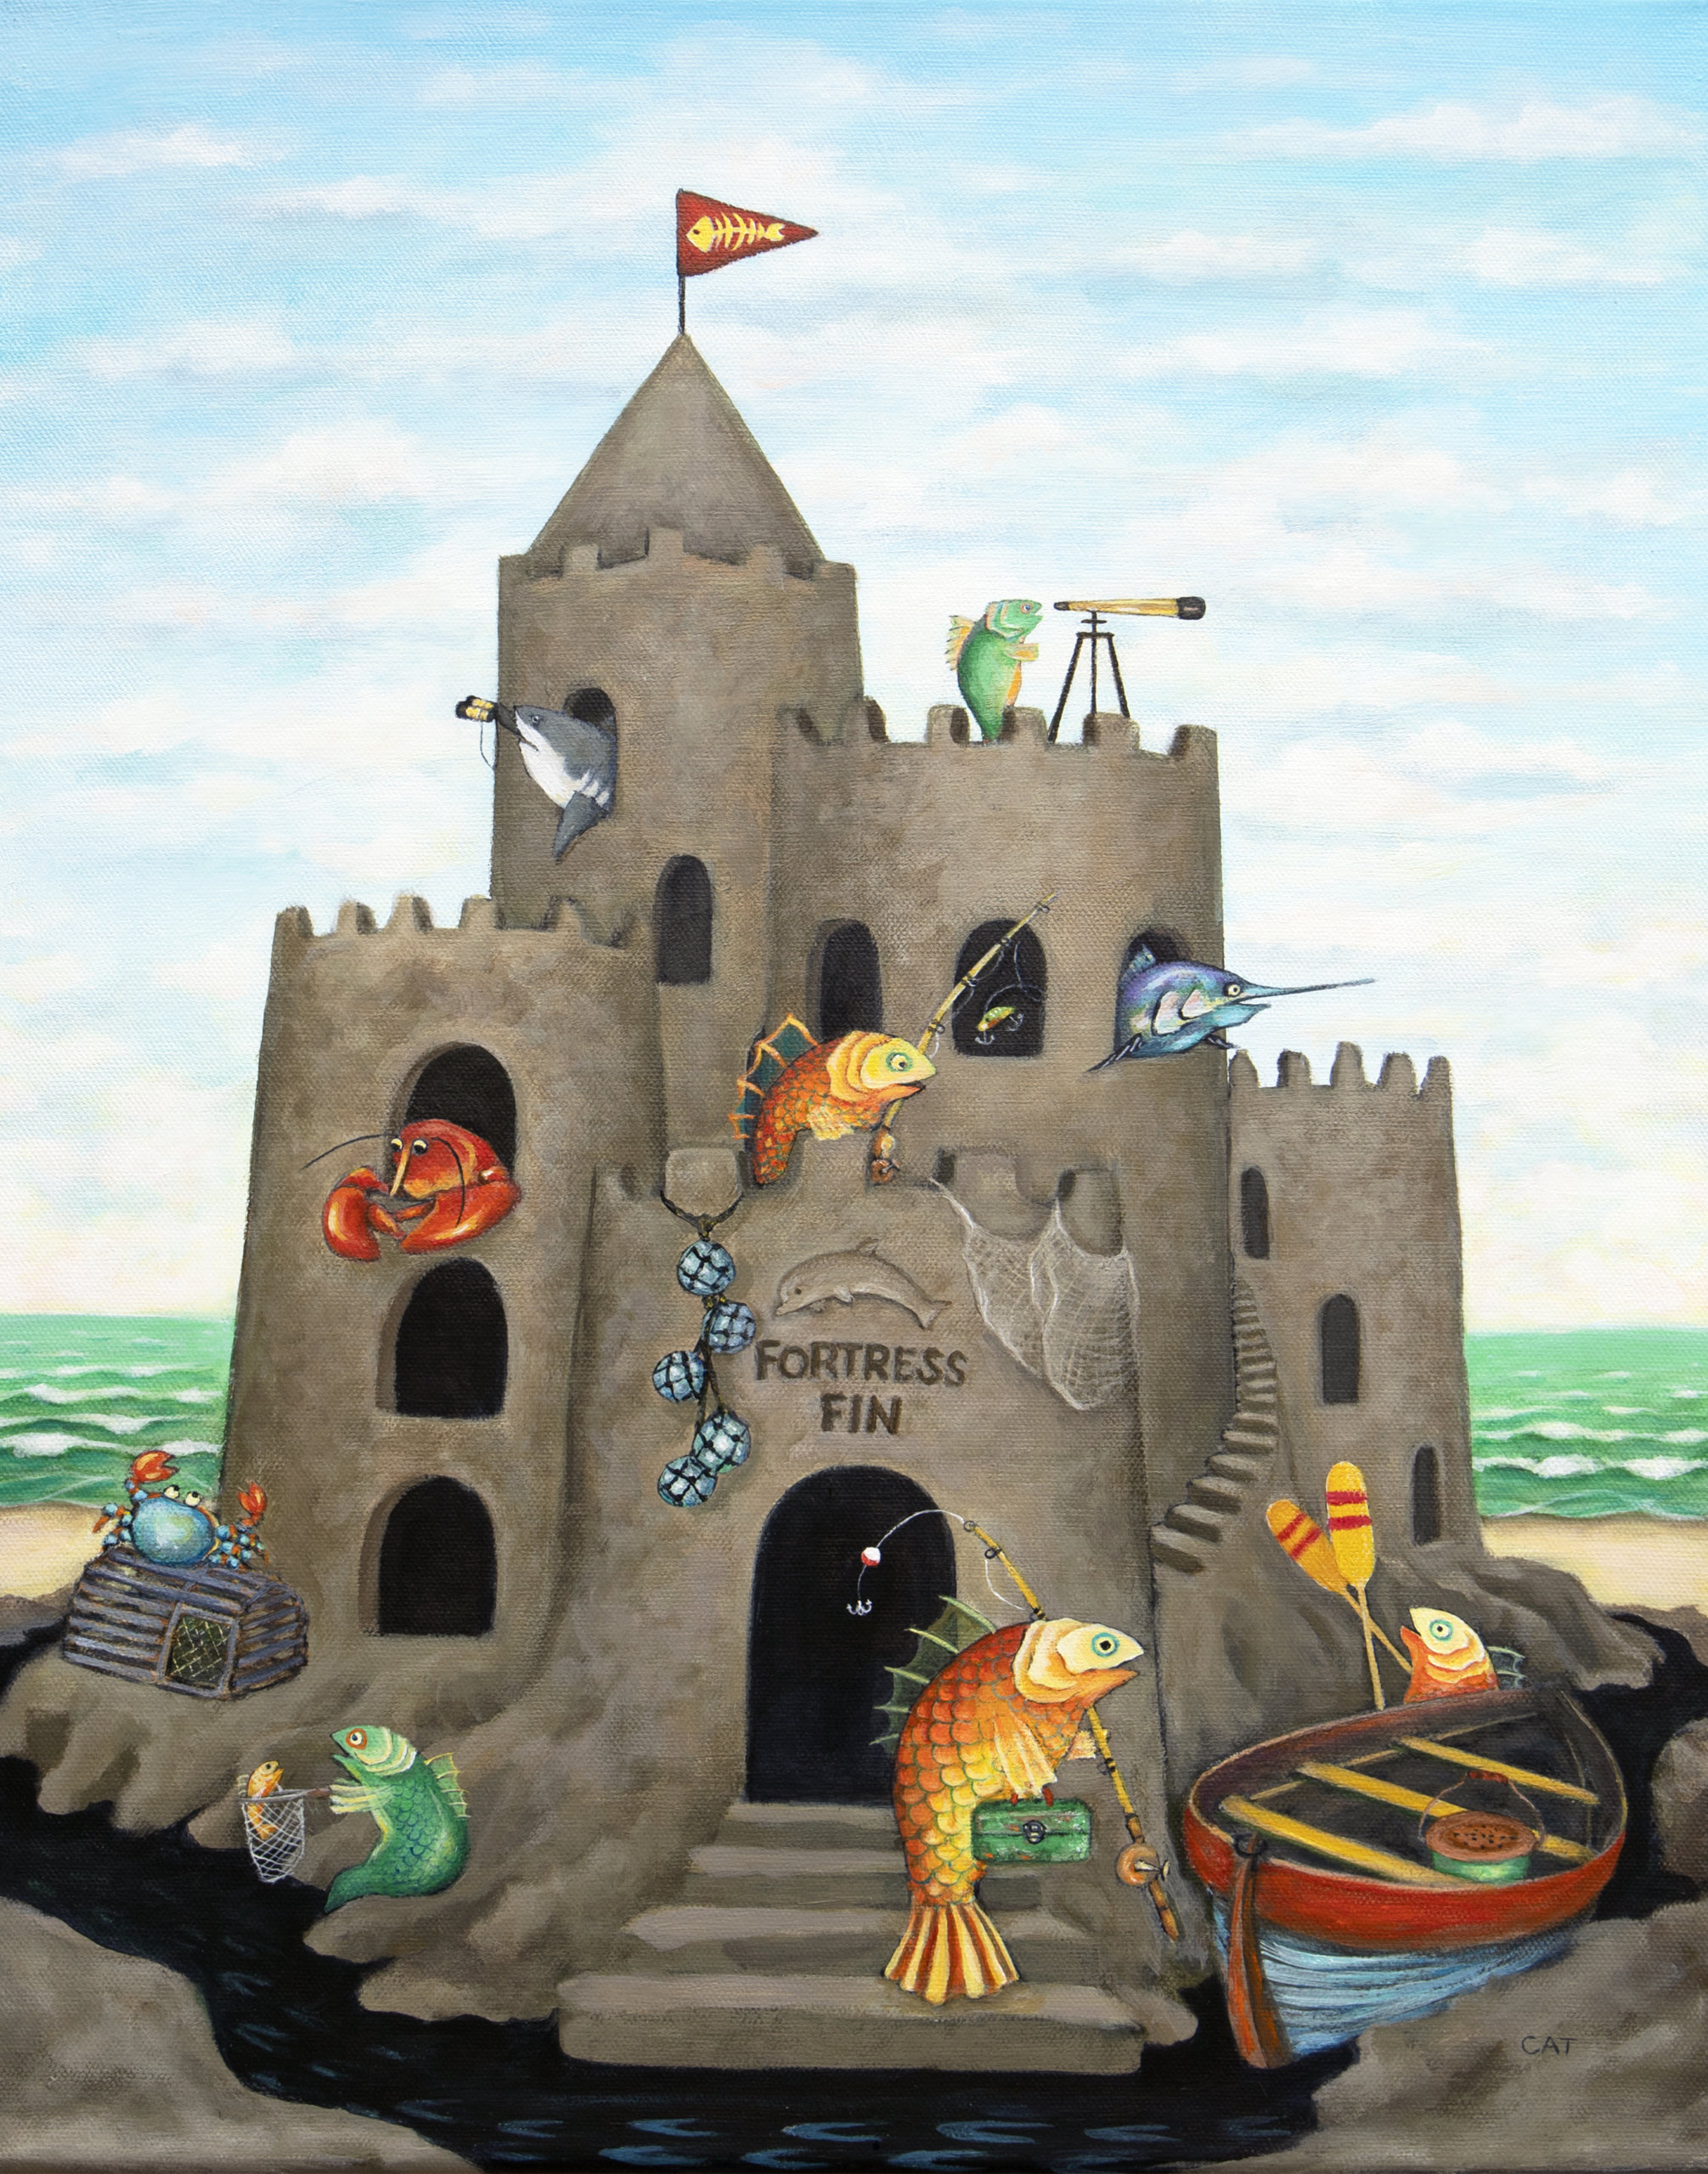 "Fortress Fin" by Cat Bachman